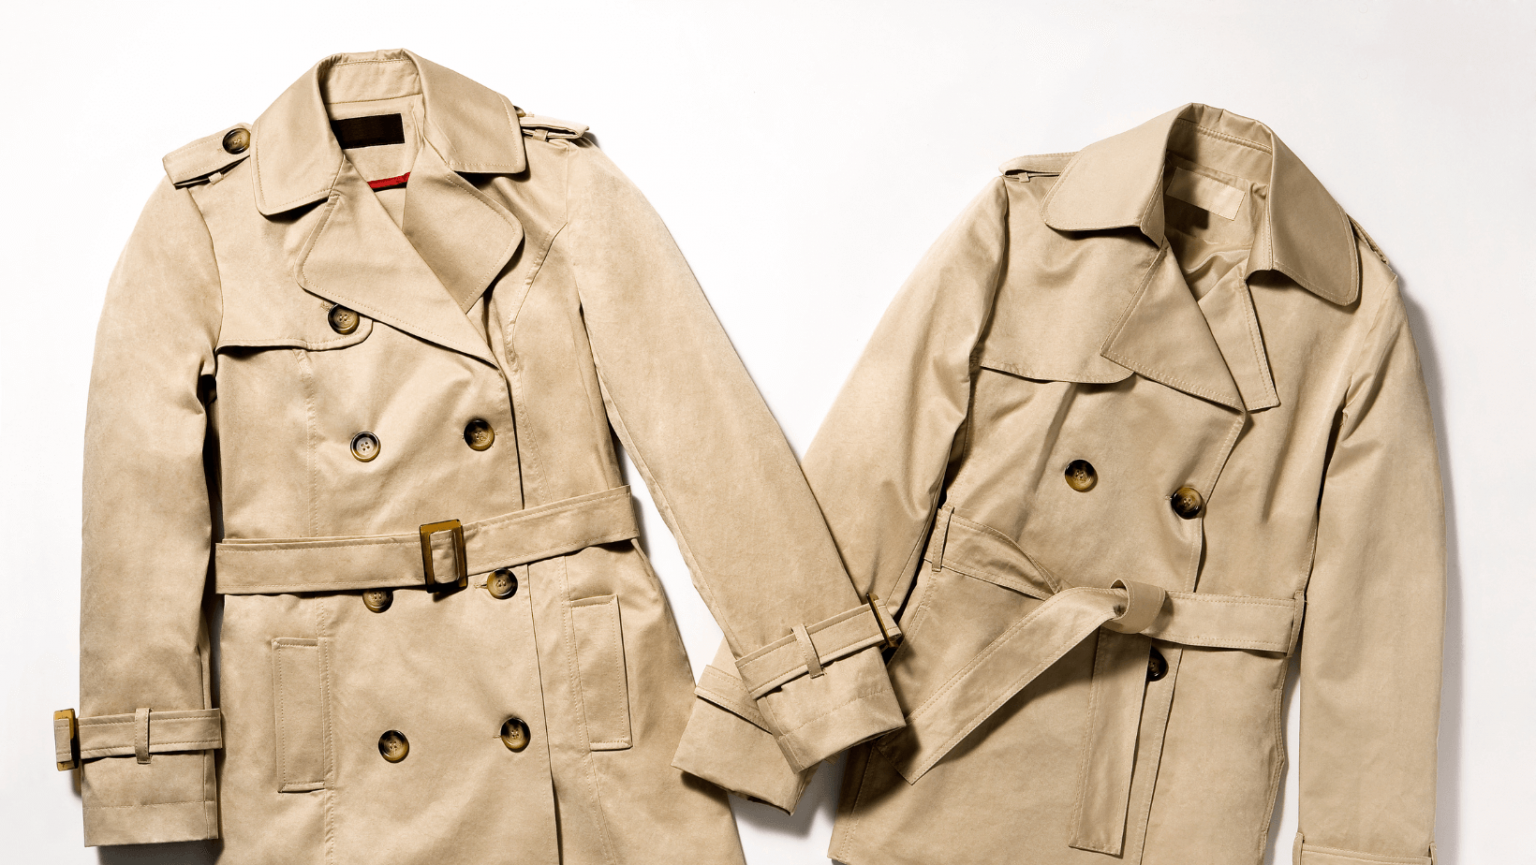 How the Trench Coat Stayed Fashionable For Over a Century - Last Call ...